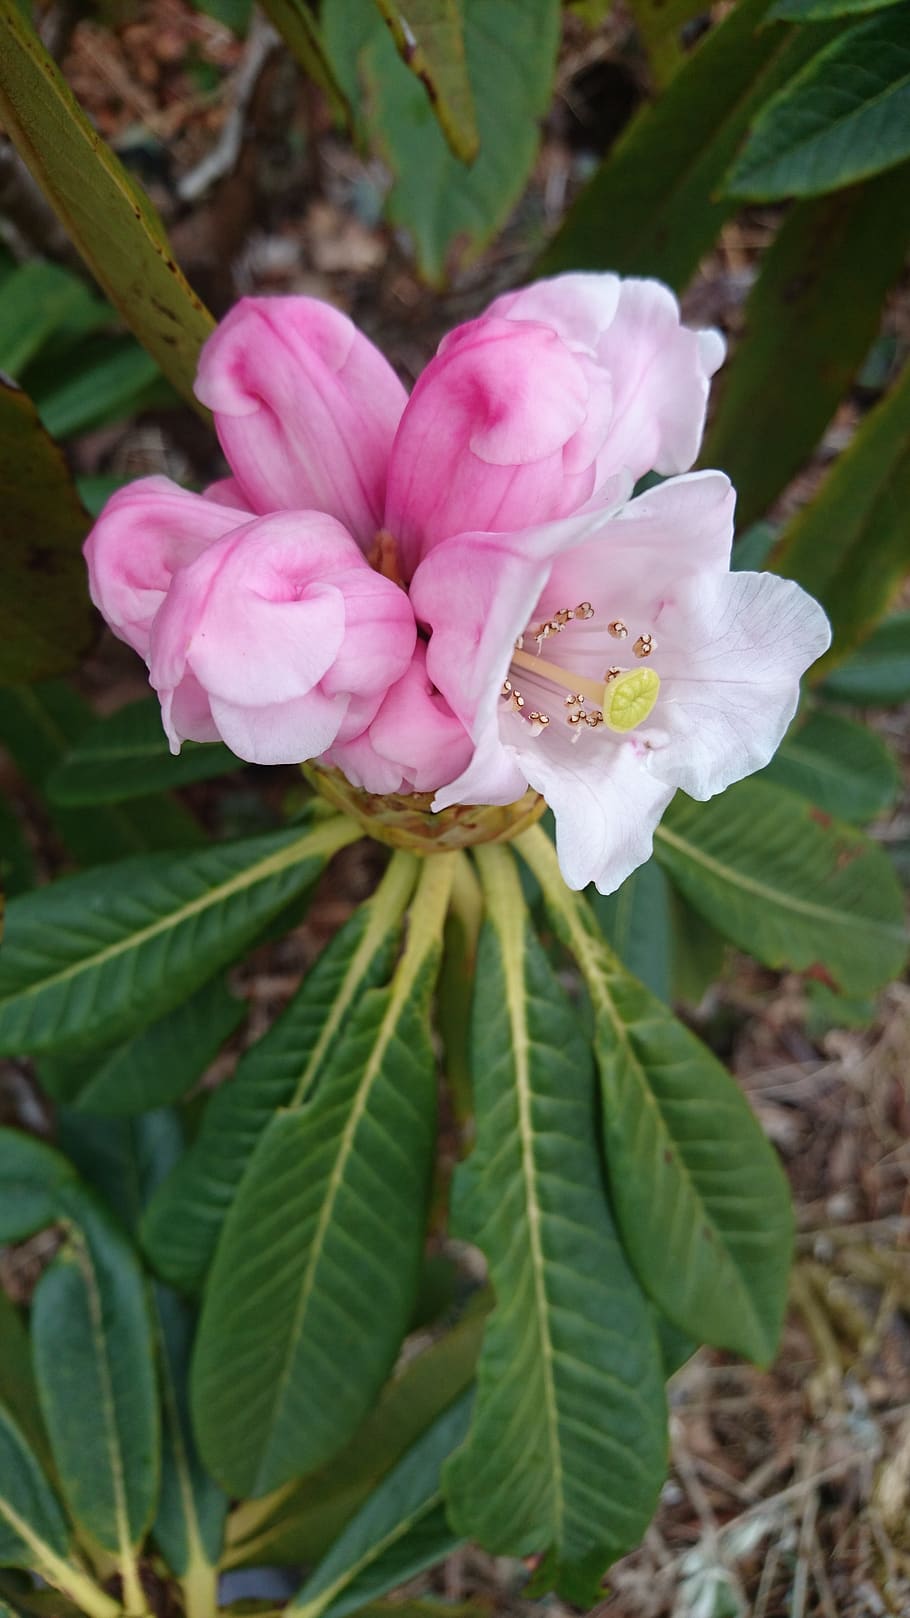 rhododendron china, plants china, wild collected seed, leaves, rhododendron bloom, nature, flower, bush, flowering plant, plant